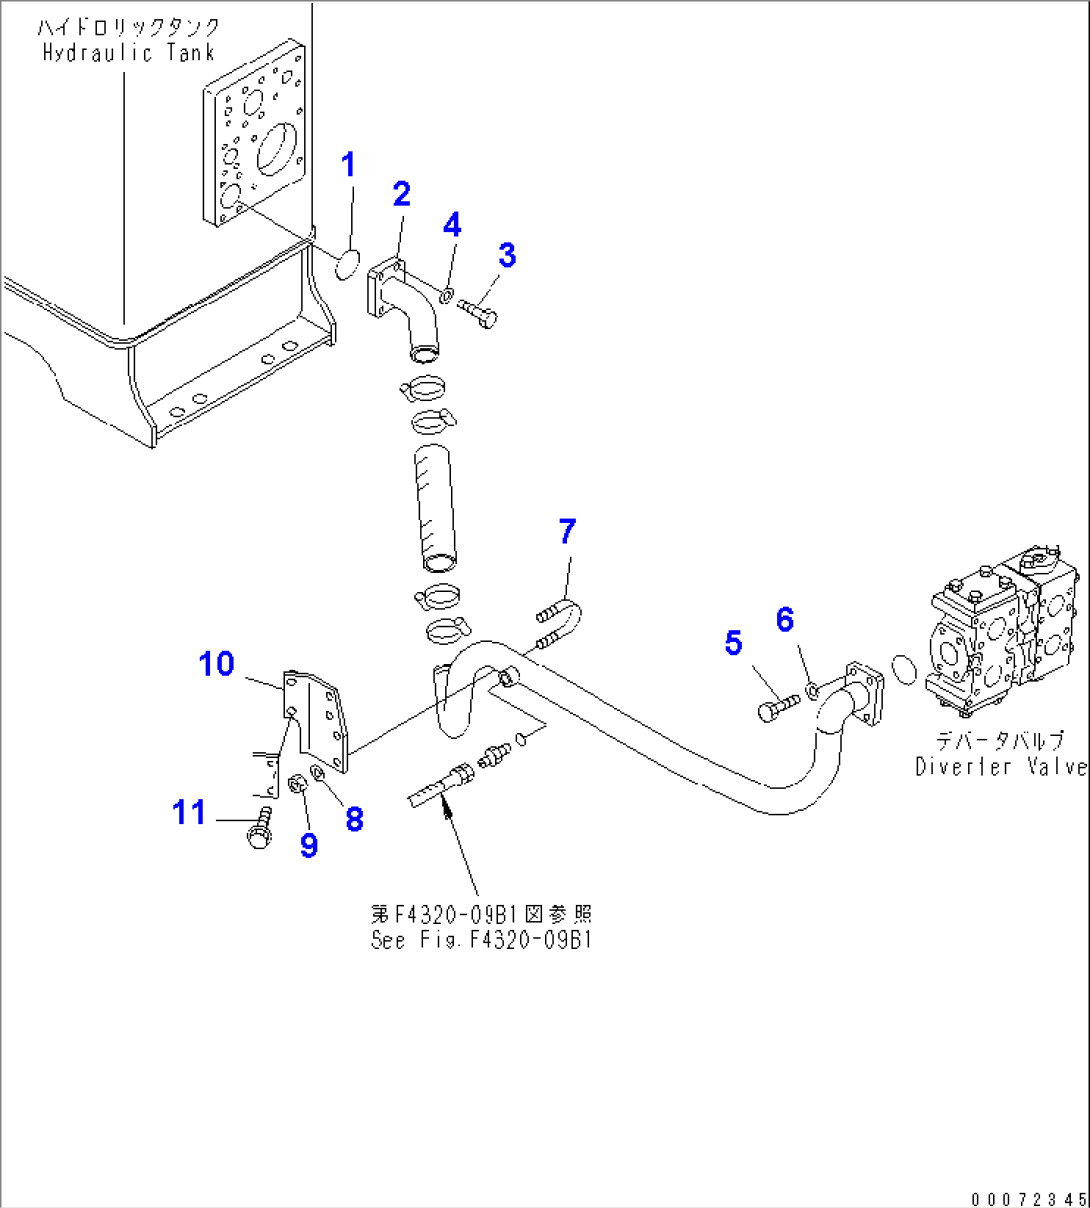 EMERGENCY STEERING PIPING (SUCTION PIPING)(#52406-)